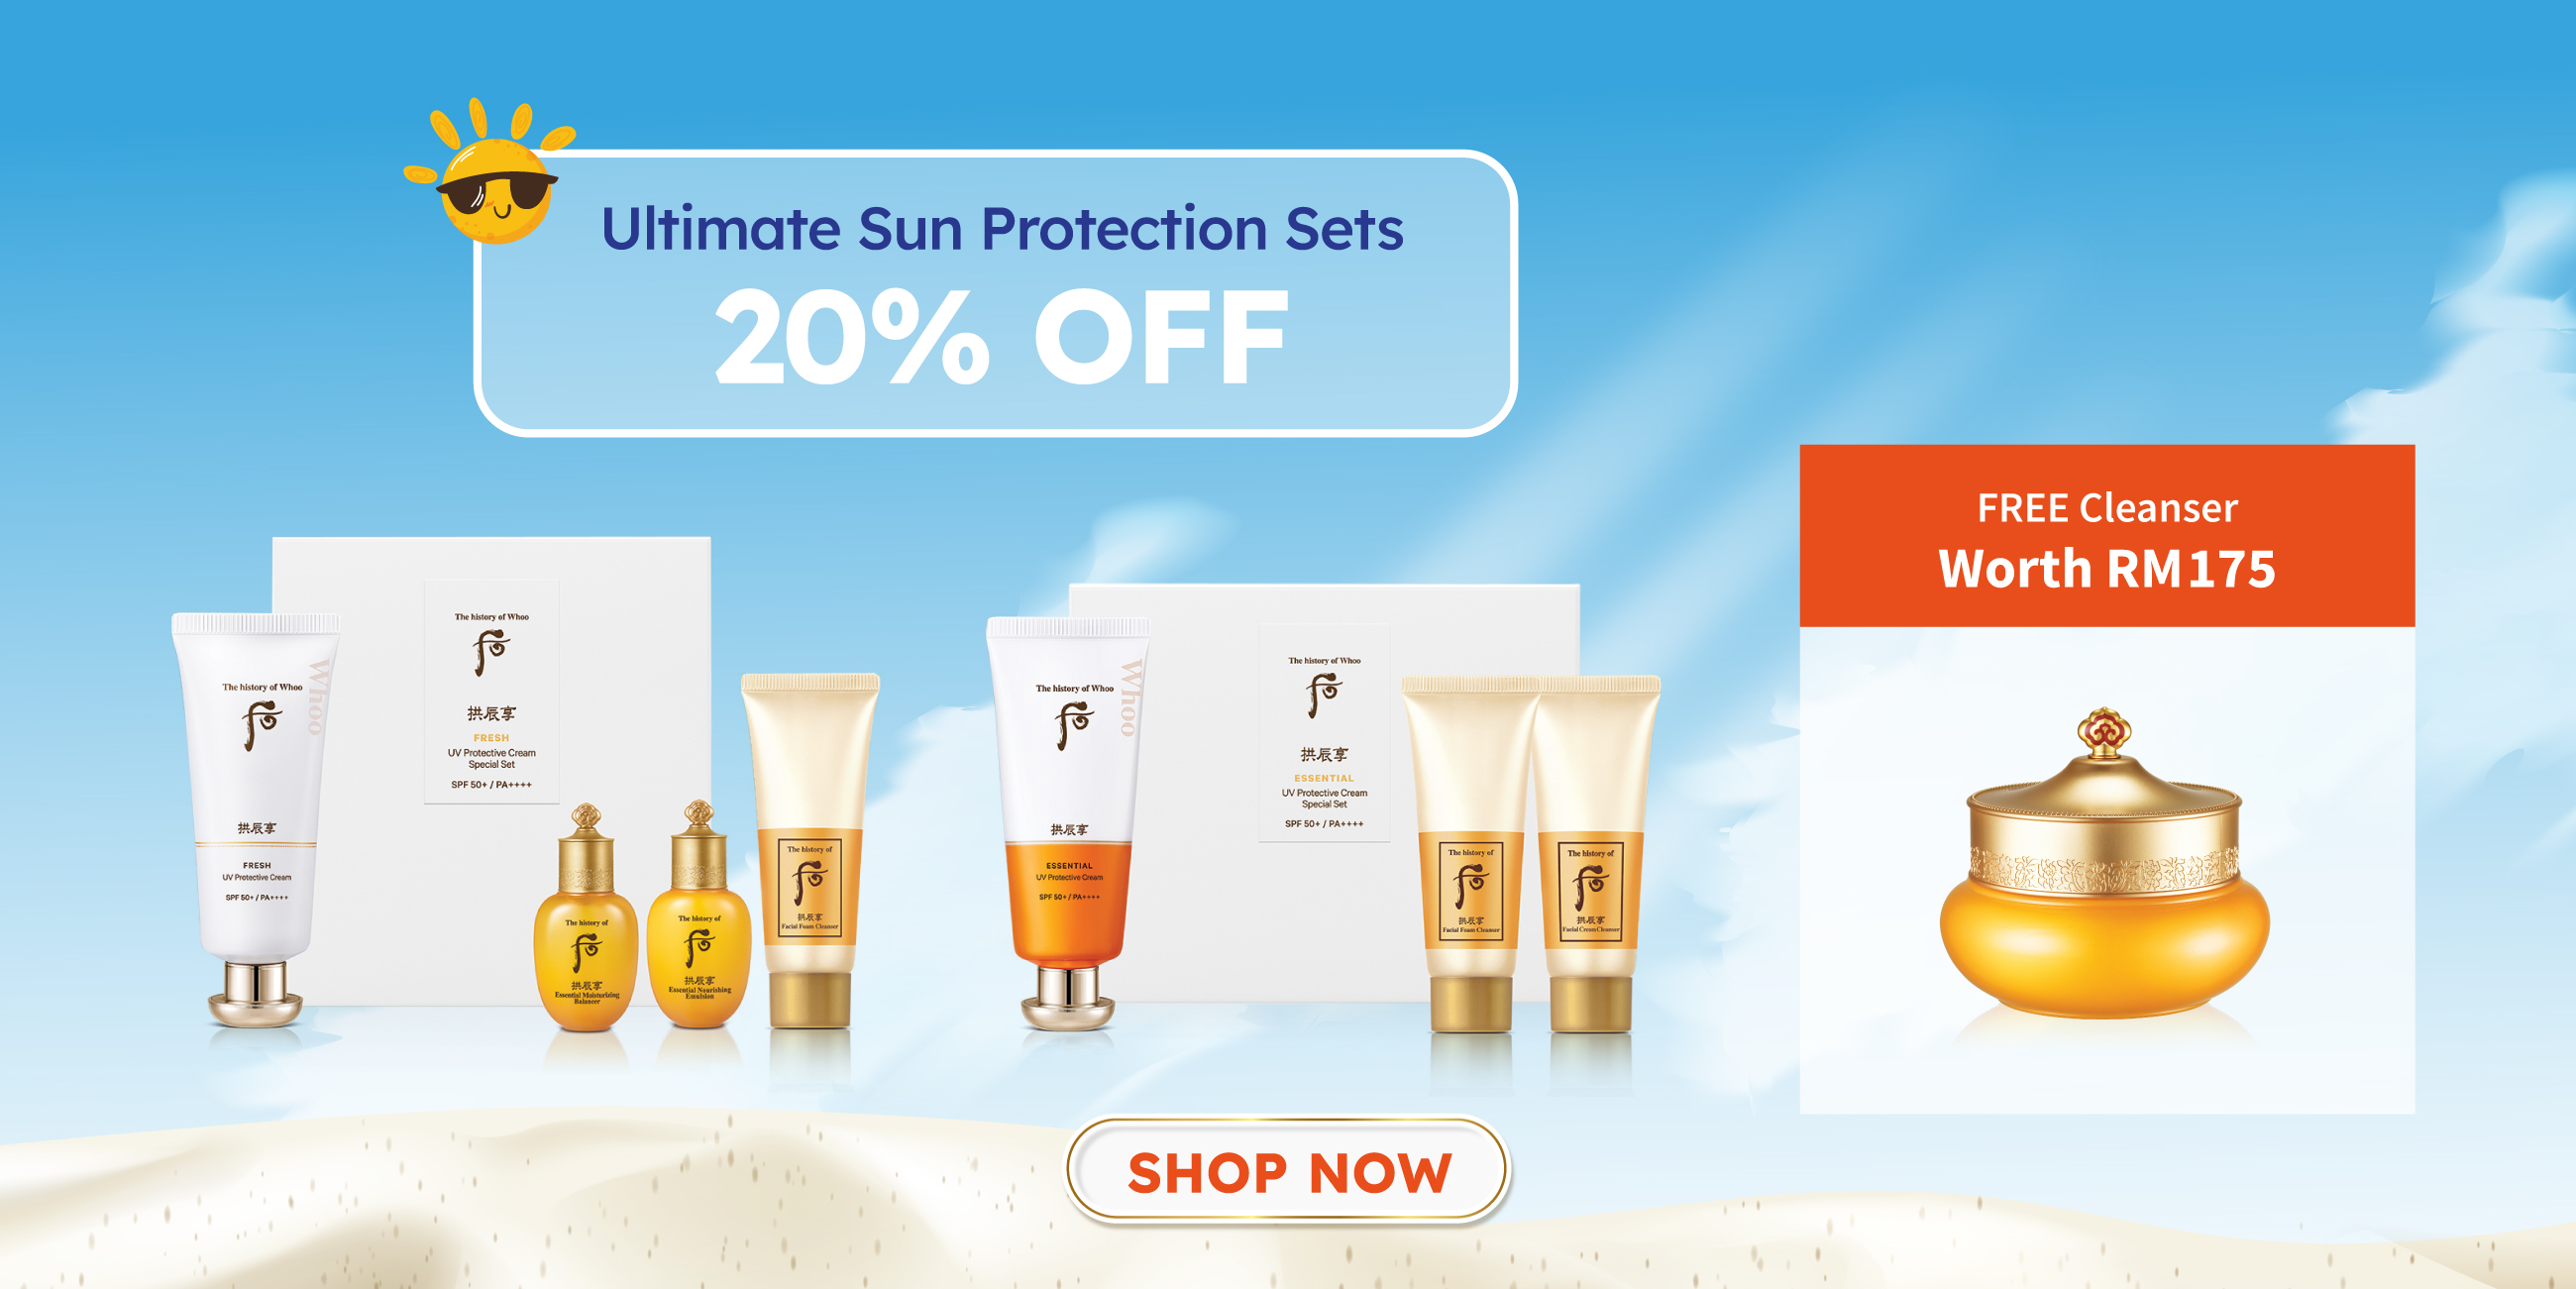 Ultimate Sun Protection Sets at 20% Off + FREE Gift